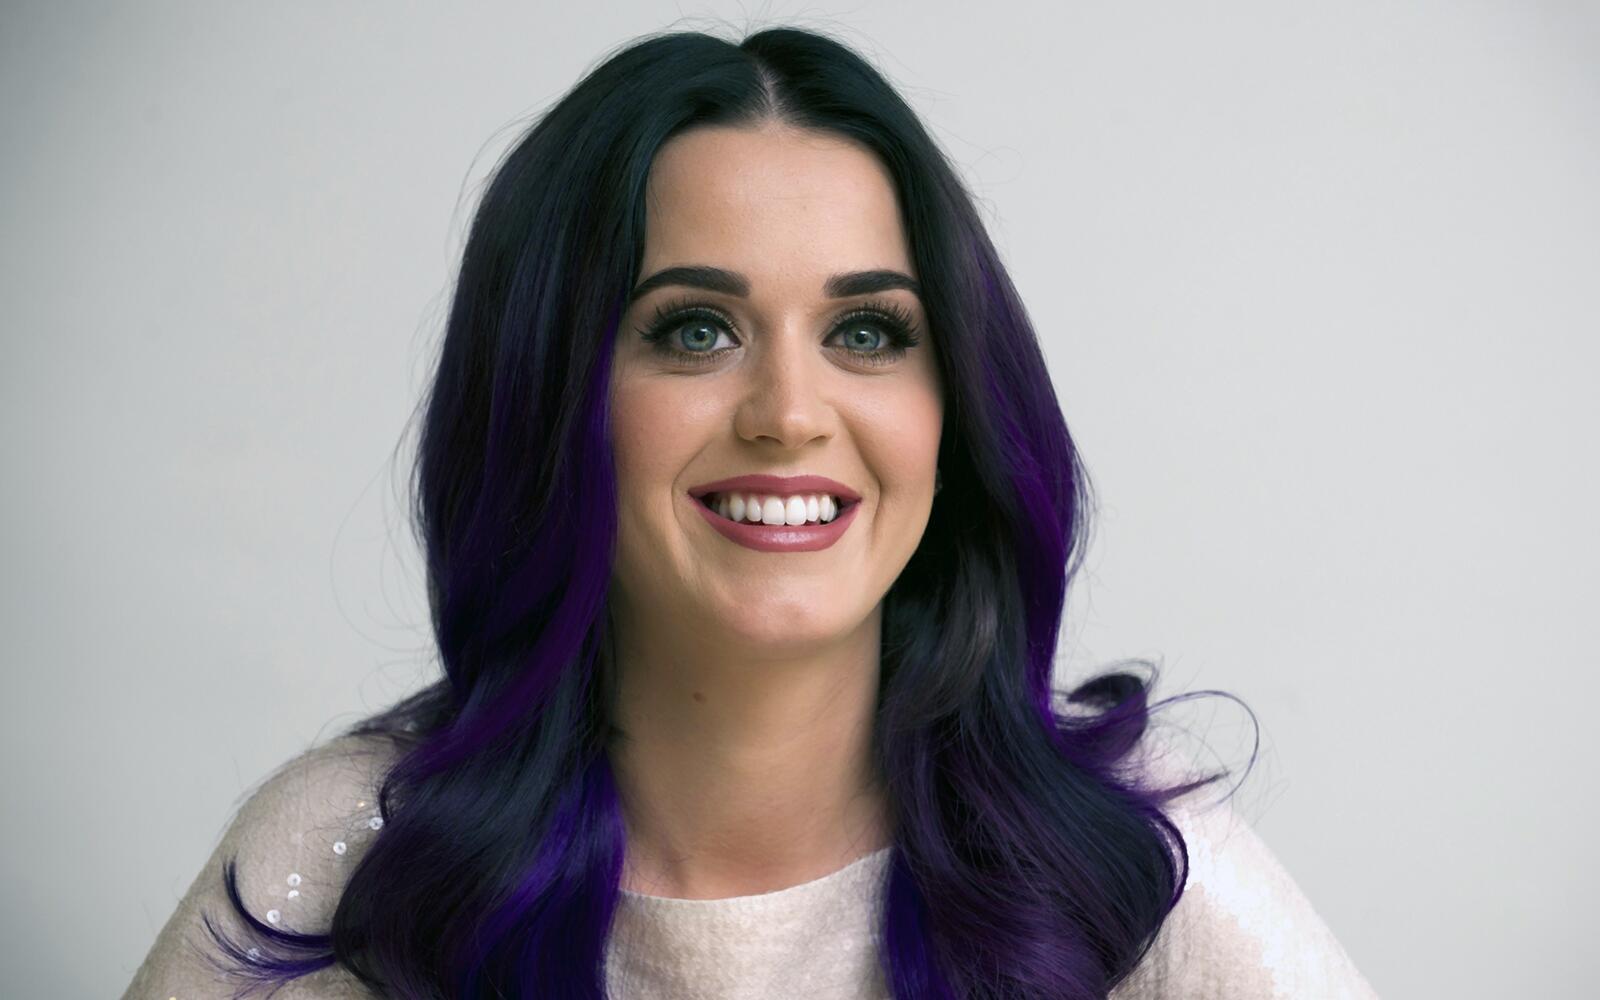 Wallpapers Katy Perry singer celebrity on the desktop